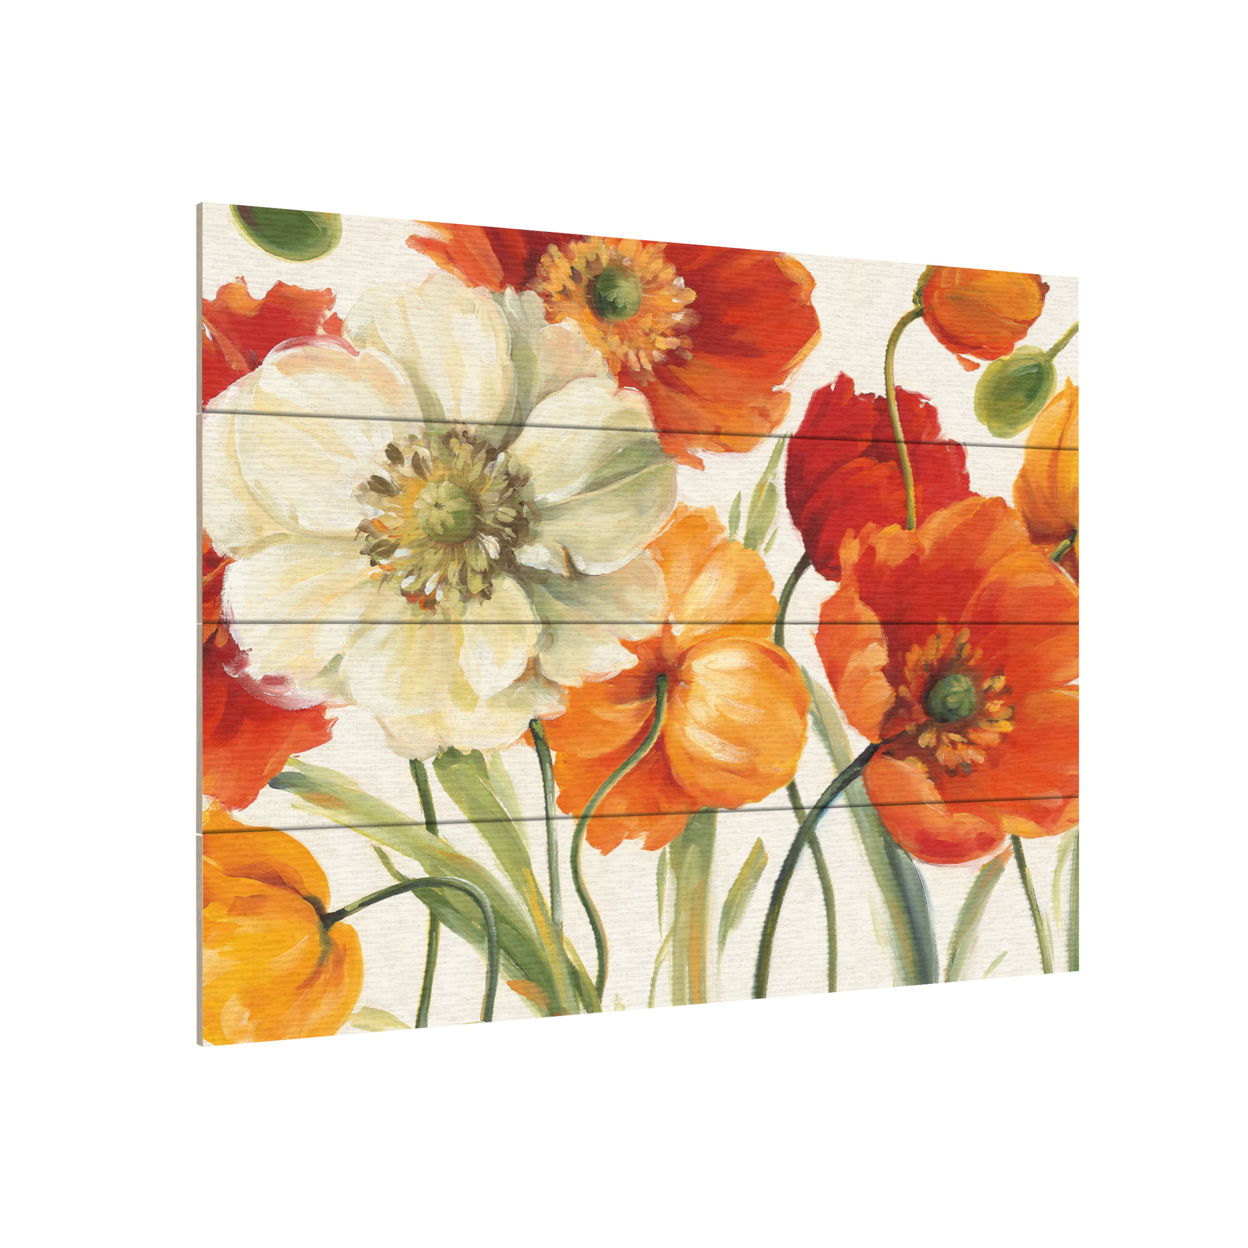 Wall Art 12 X 16 Inches Titled Poppies Melody I Ready To Hang Printed On Wooden Planks